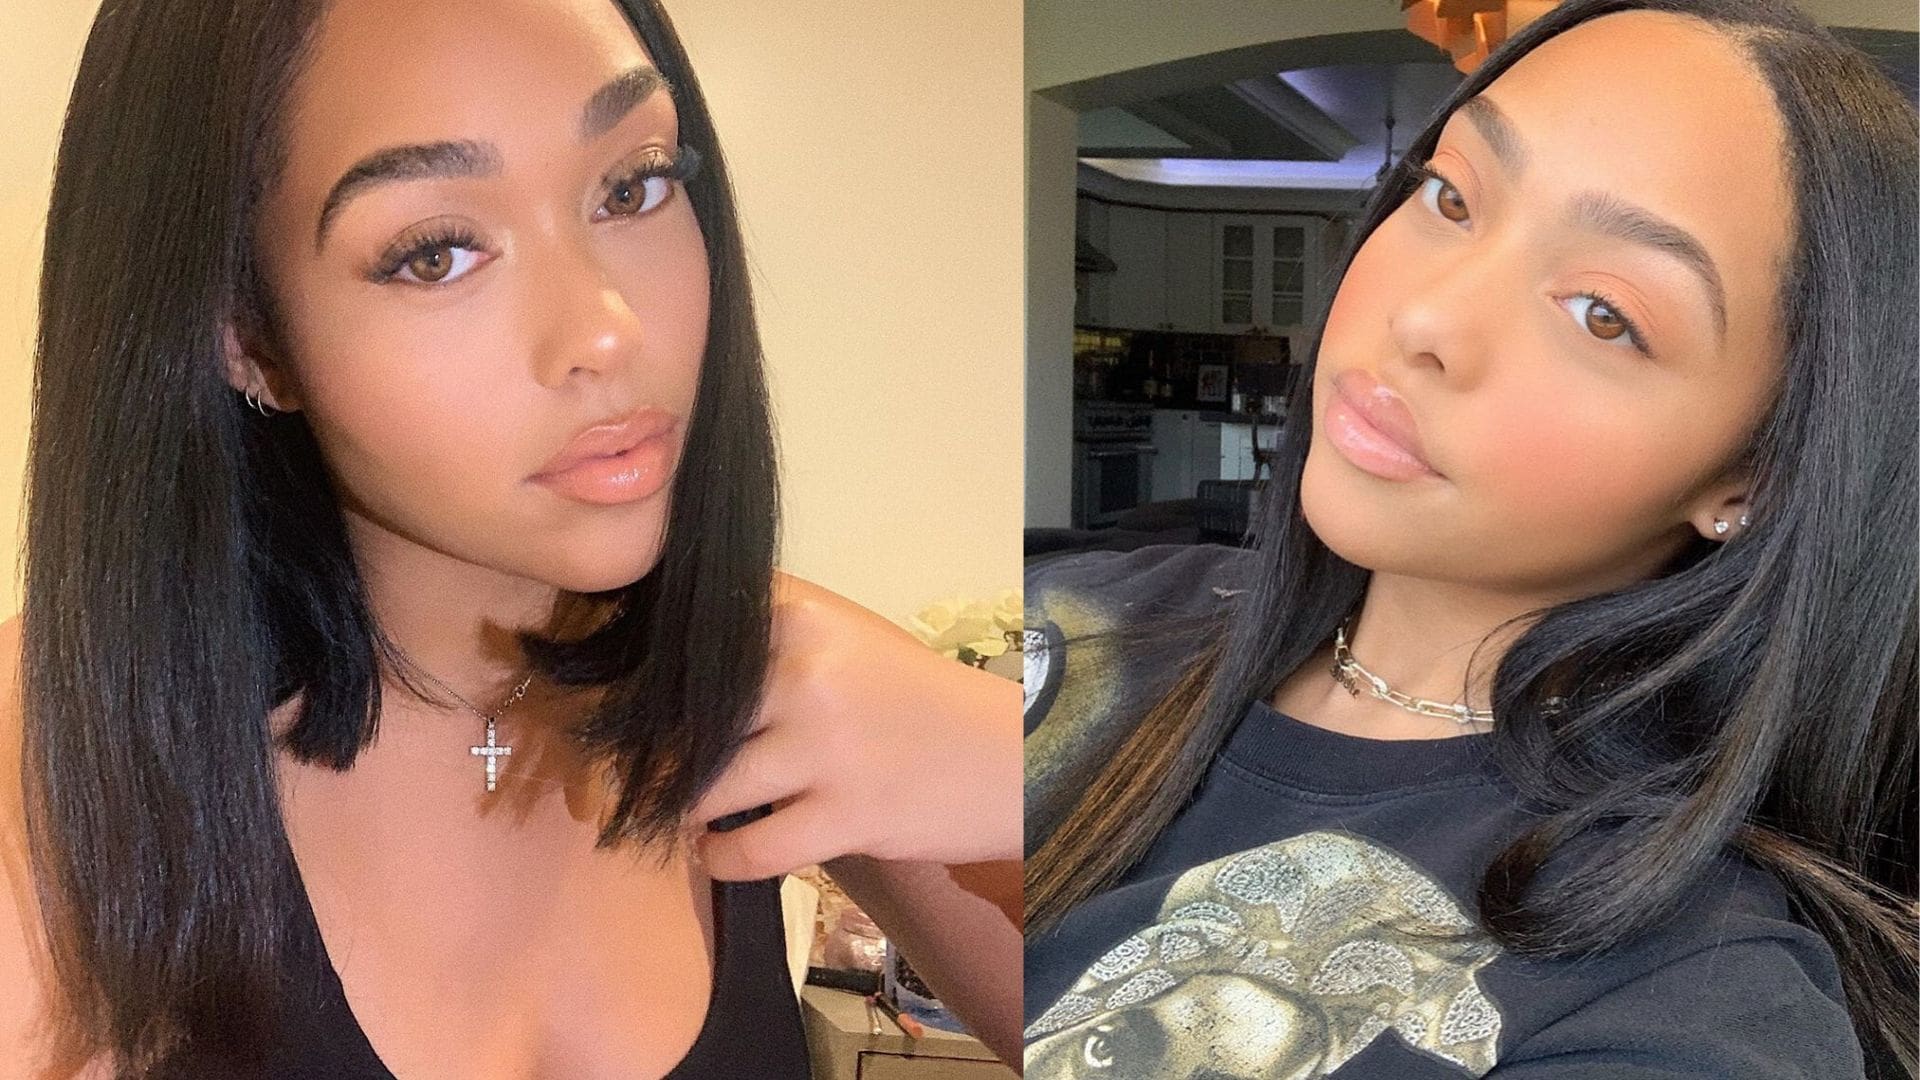 Jordyn Woods Shares A Skincare Video Featuring Her Gorgeous Sister, Jodie - See Them Twining And Glowing Together